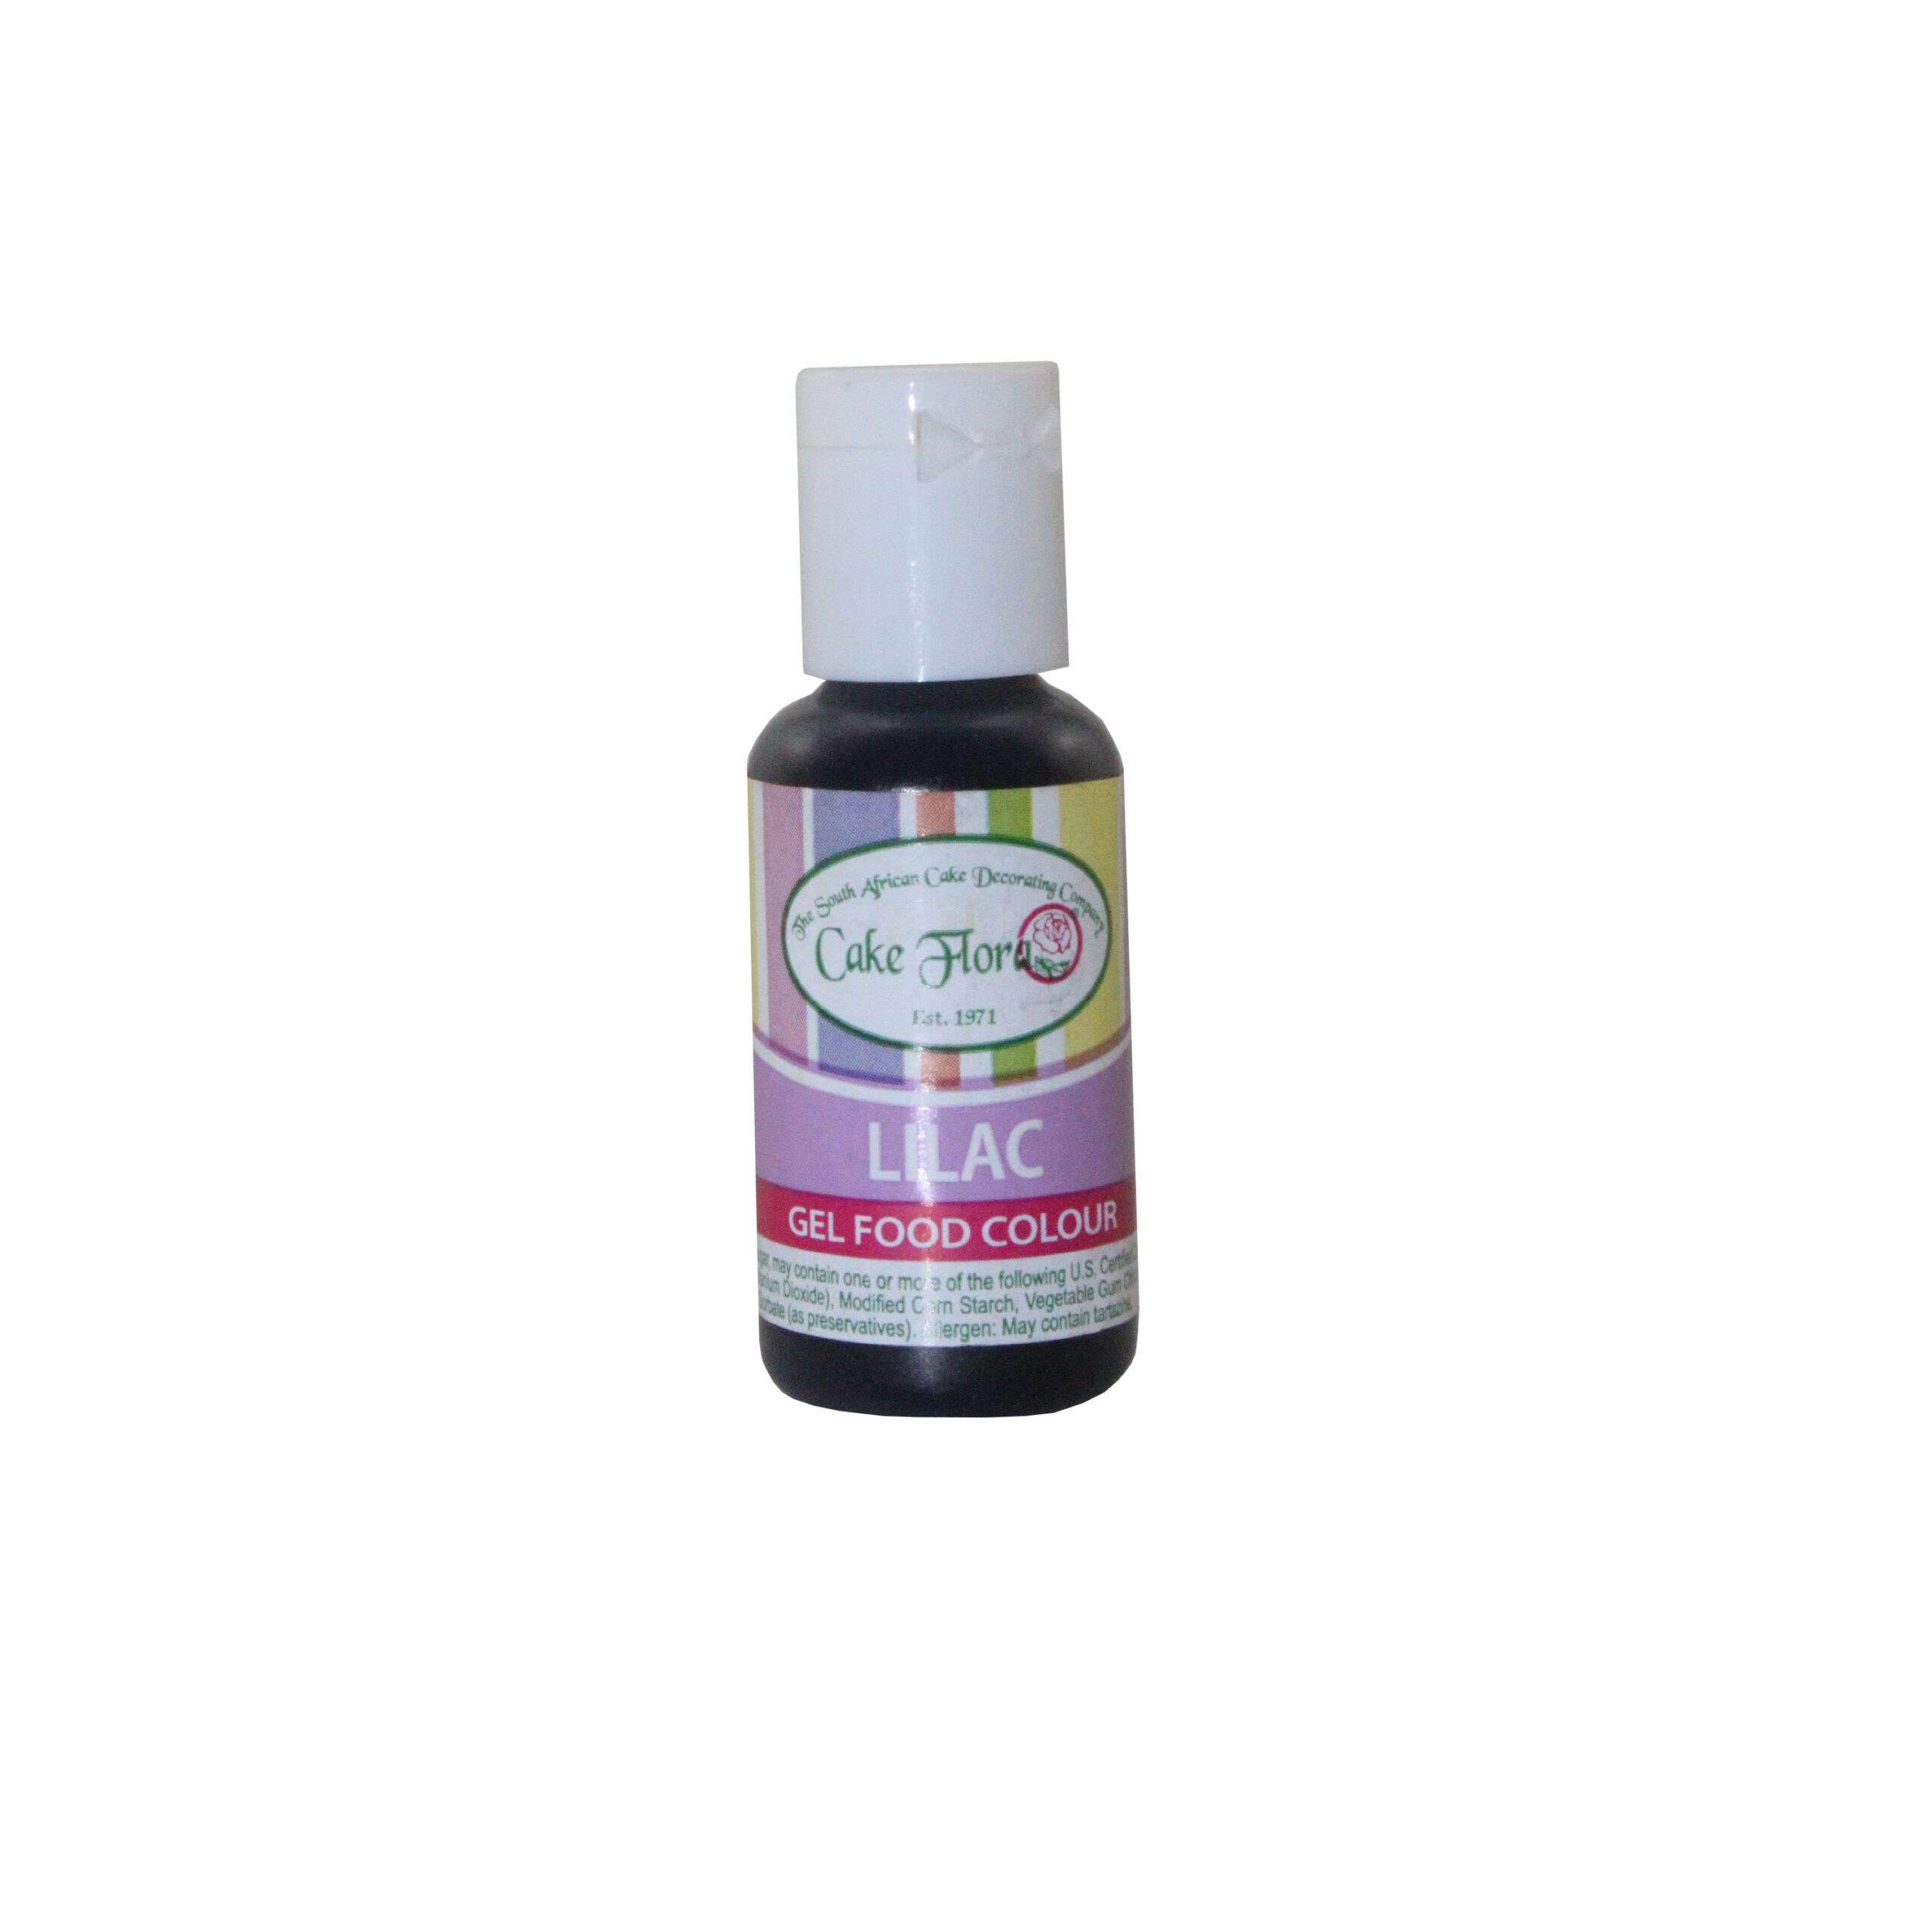 CAKE FLORA FOOD
COLOUR OIL
BASED 21g
YELLOW